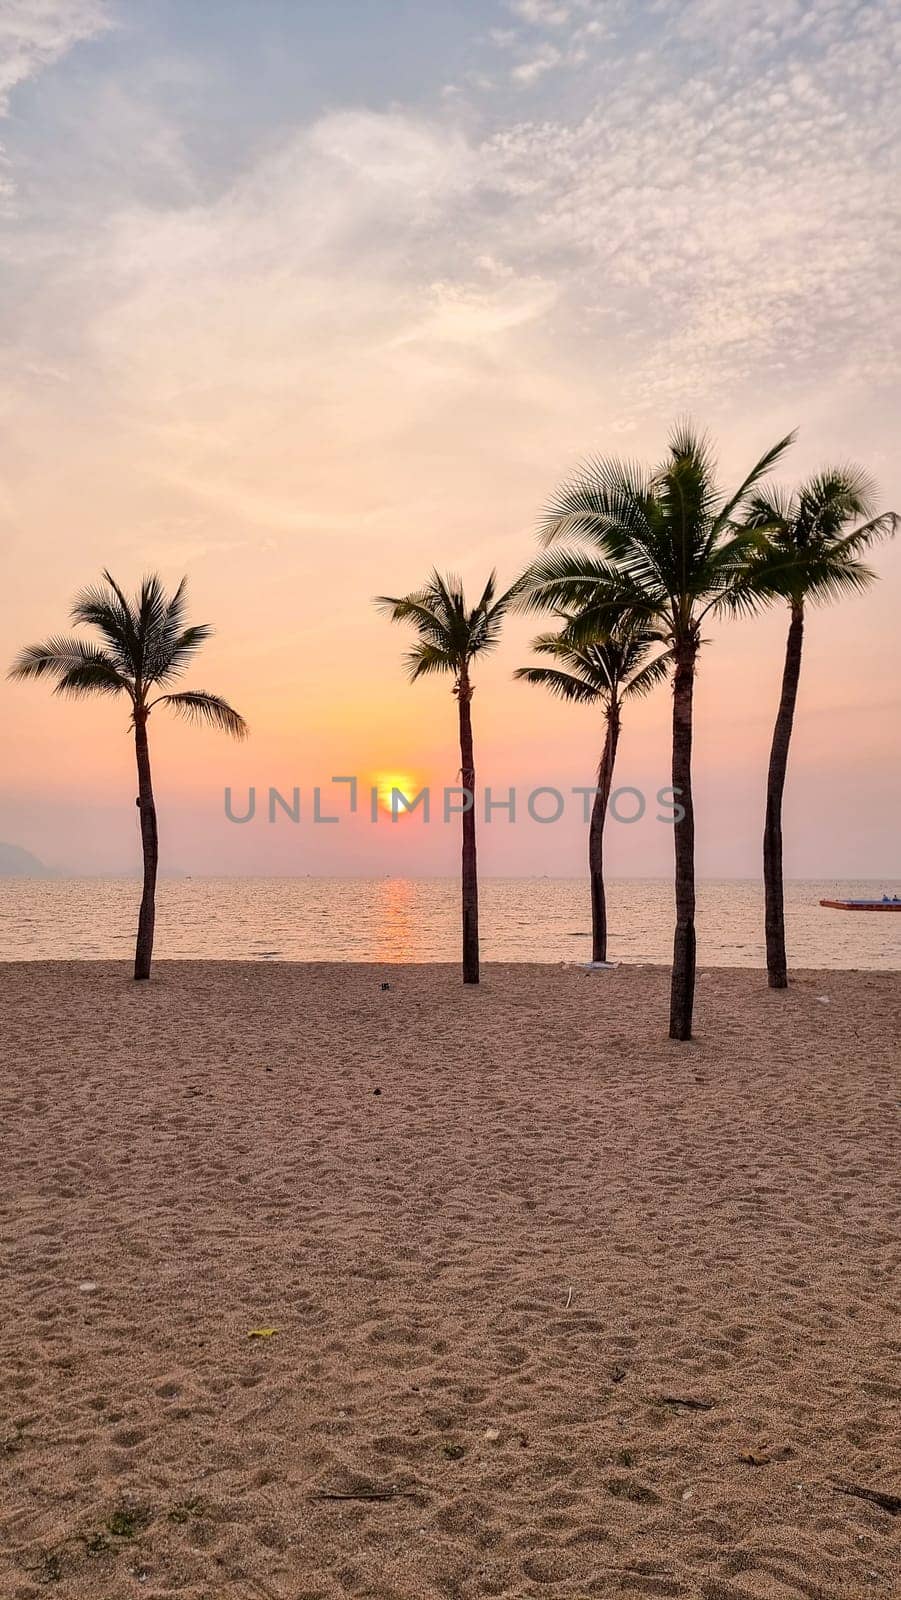 Palm trees sway gently in the breeze as a boat peacefully glides in the distance on the tranquil beach by fokkebok